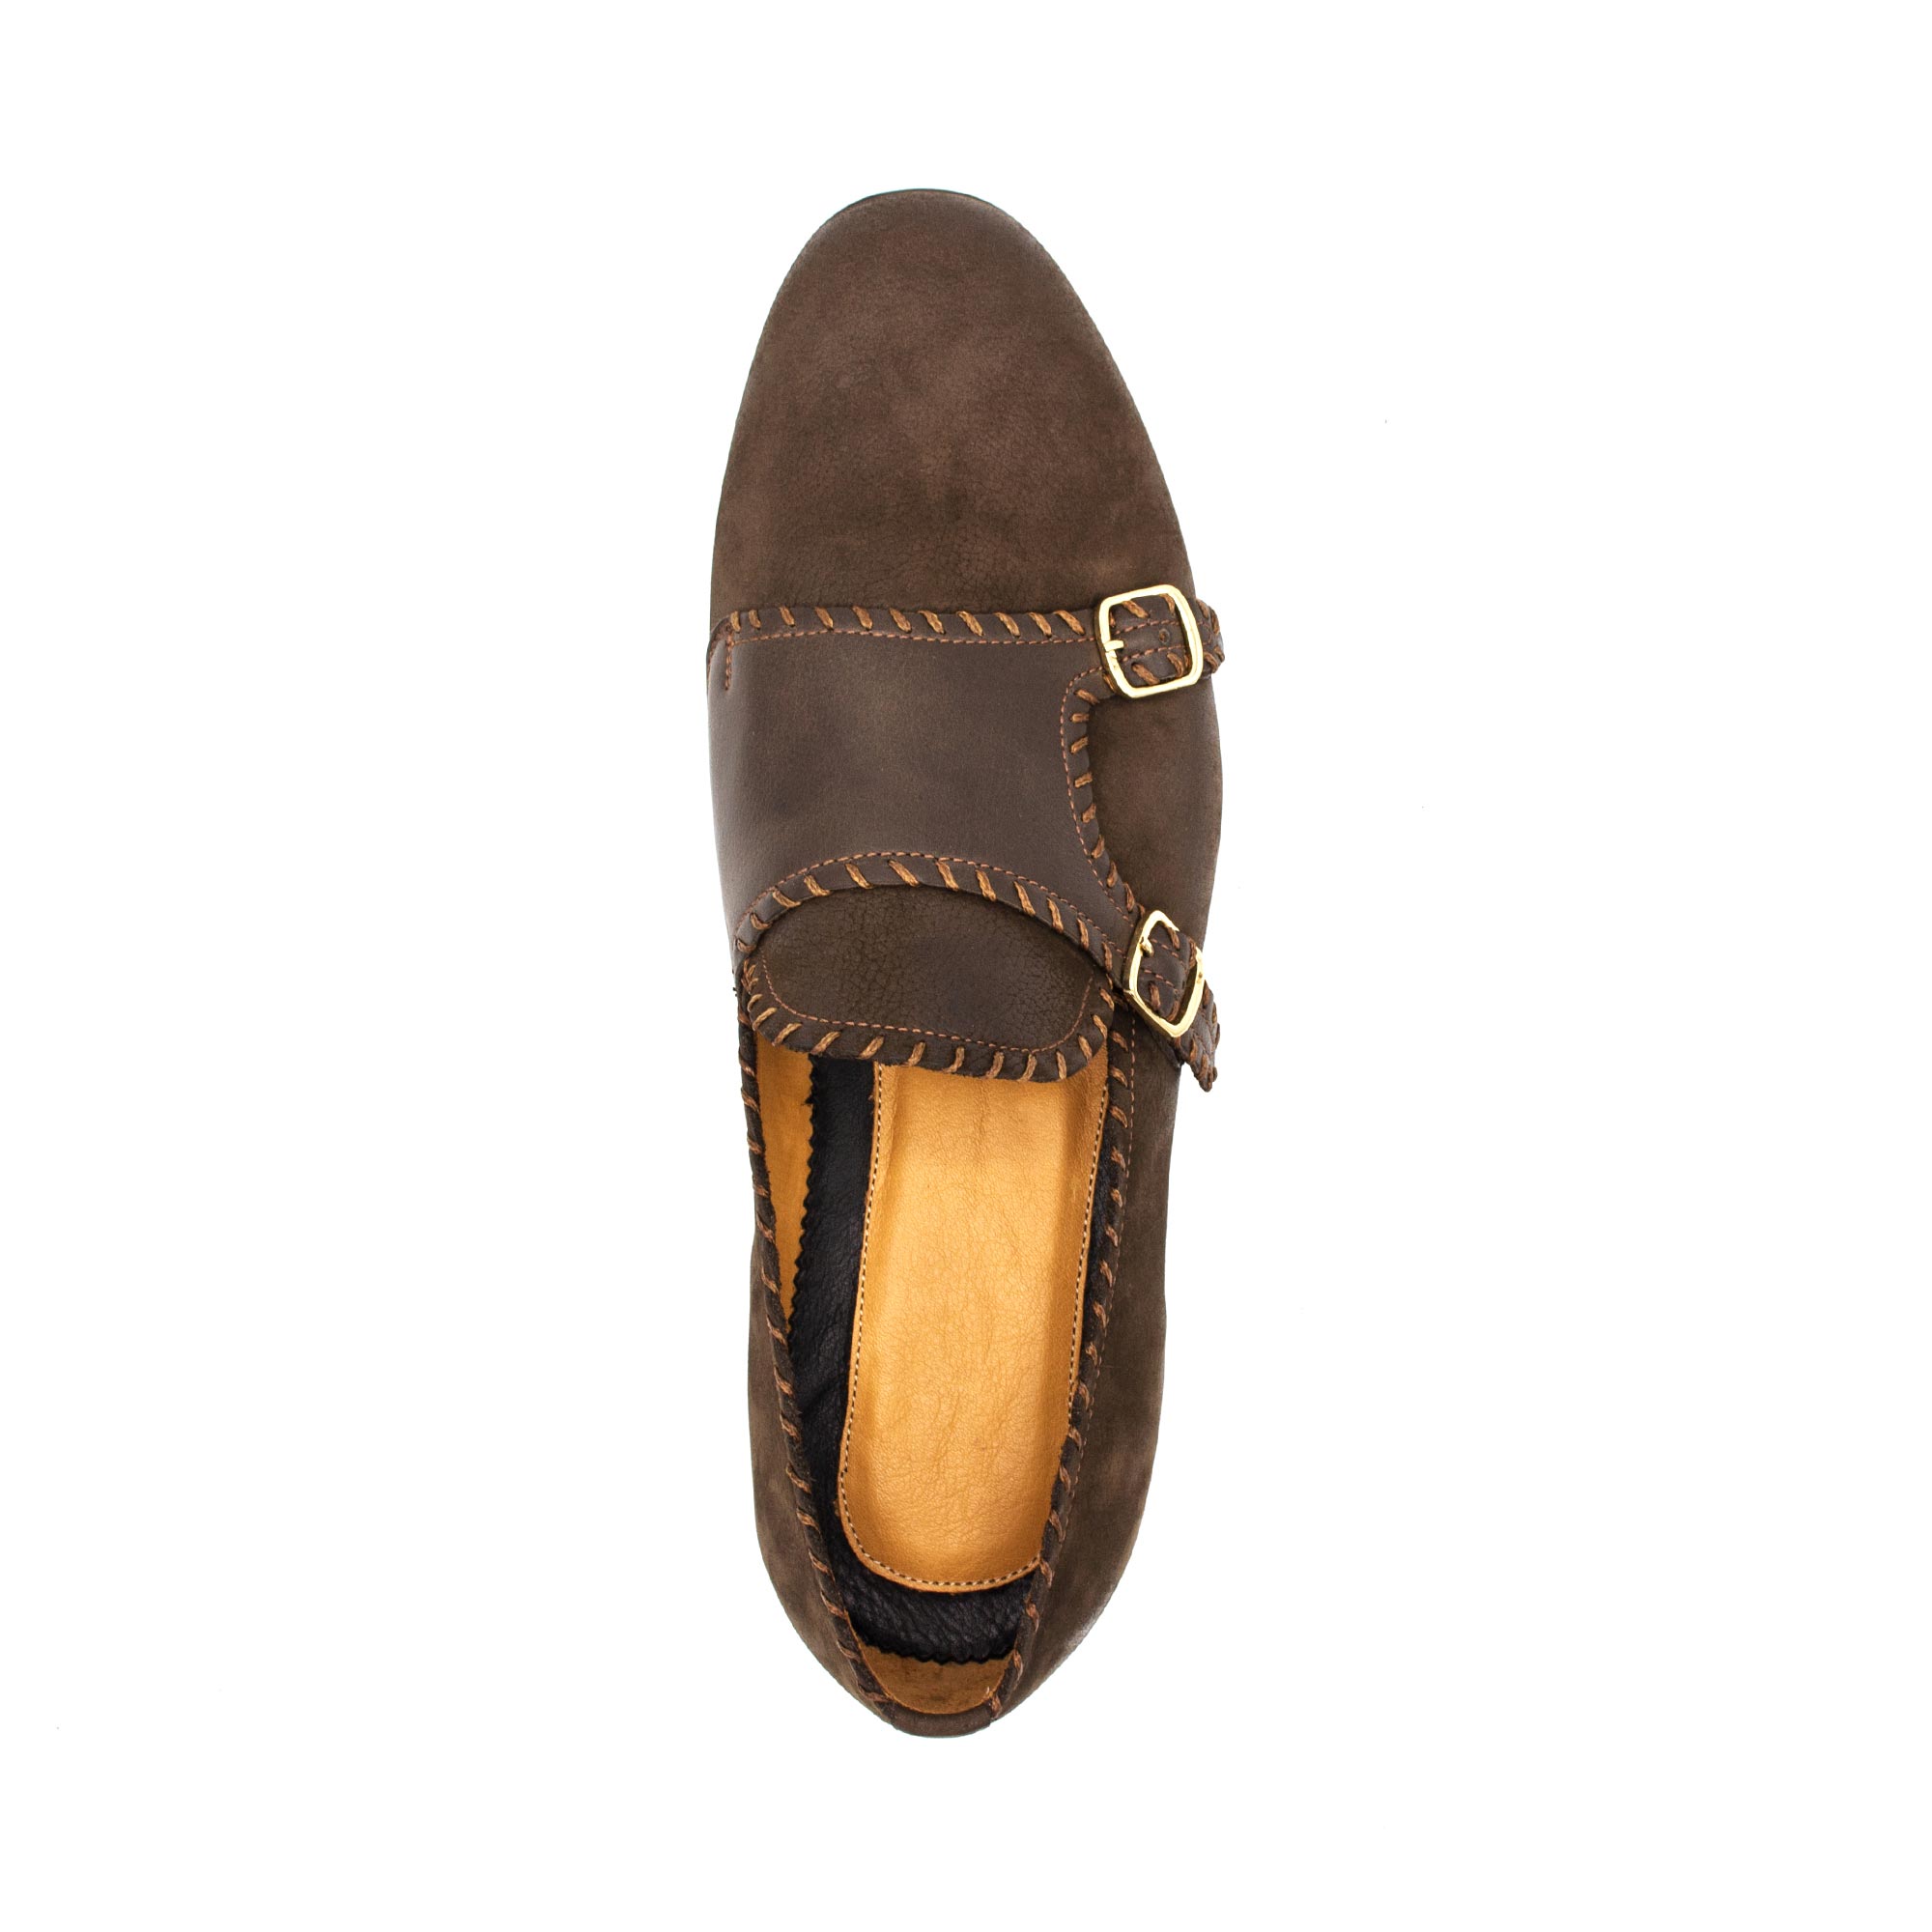 NEBO | BROWN | Zerbay Handcrafted Leather Shoes